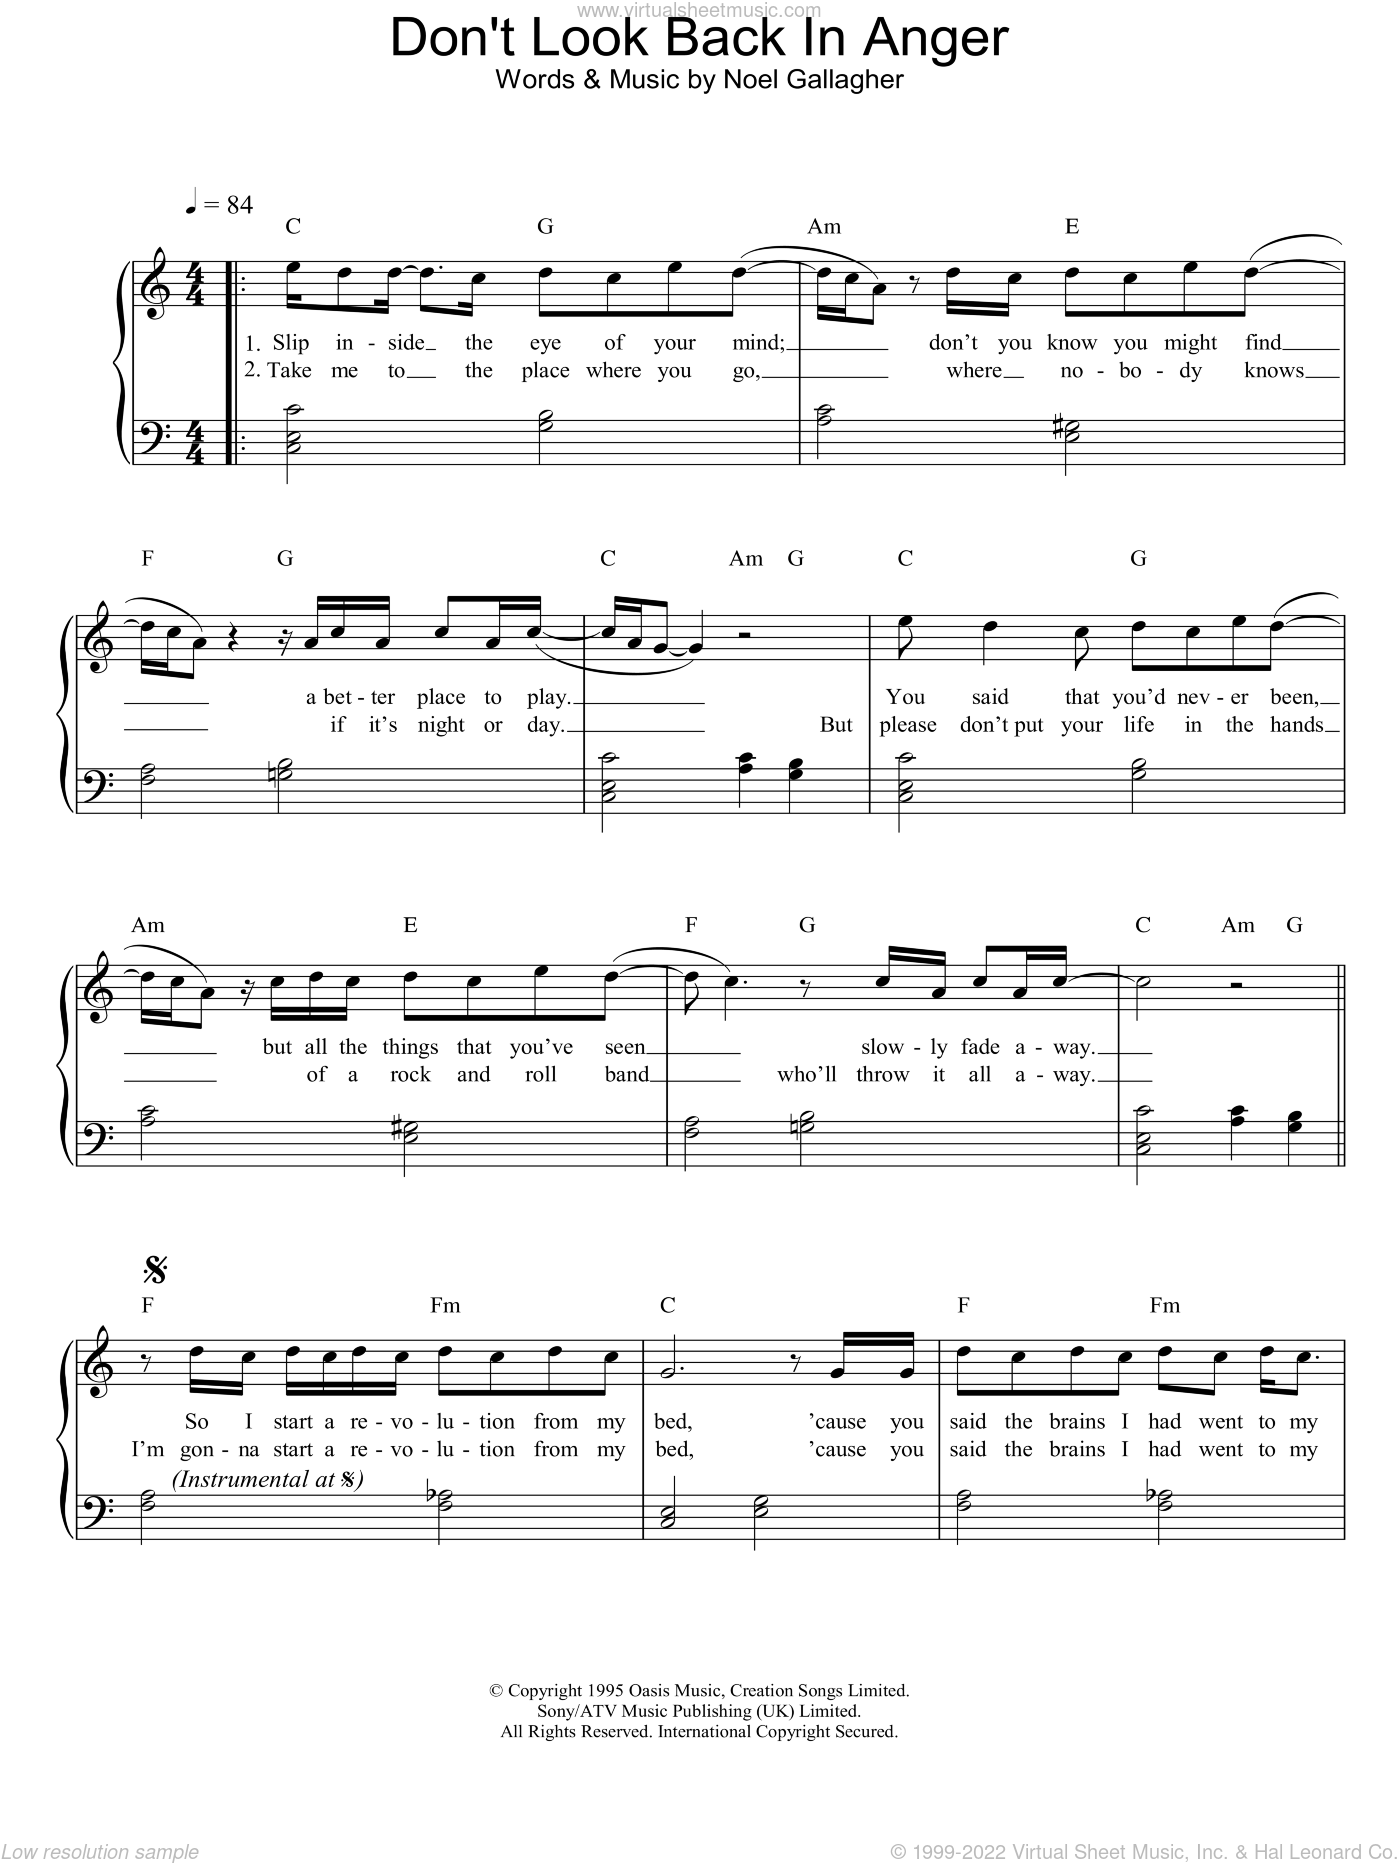 Regnskab Rettidig Spille computerspil Oasis - Don't Look Back In Anger sheet music (intermediate) for piano solo